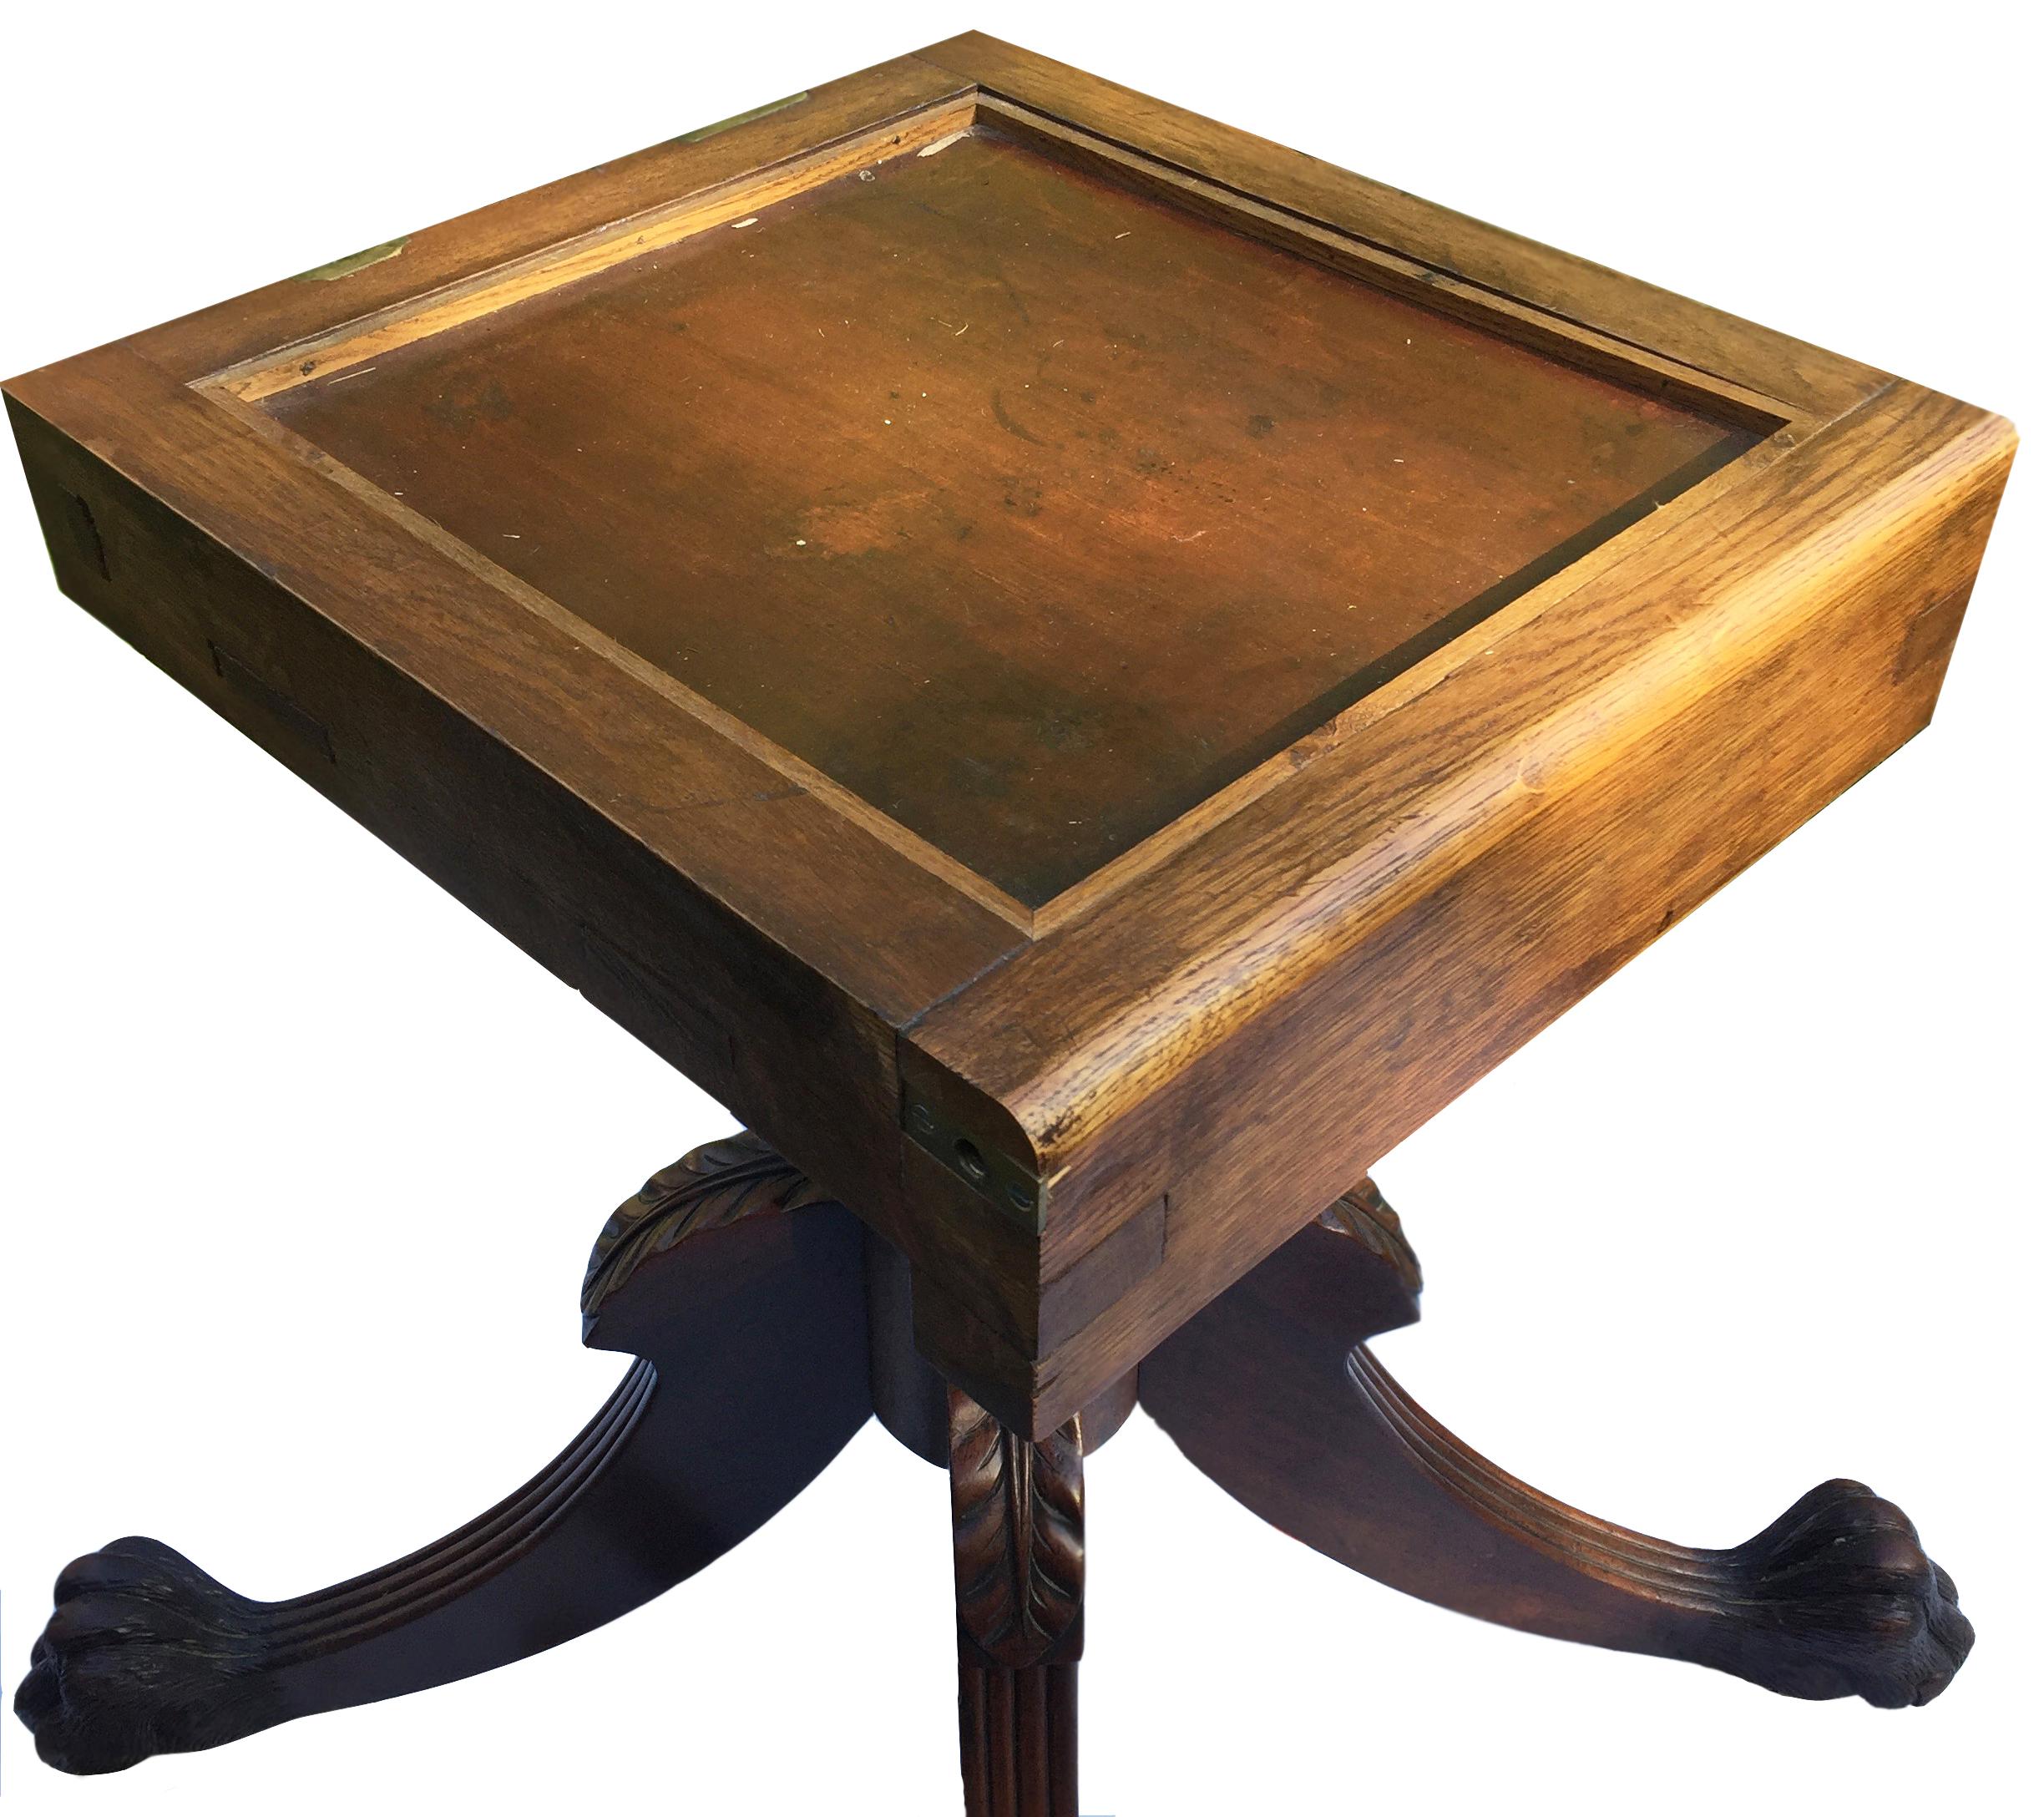 19th Century Regency Period Irish Mahogany Tilt Top Breakfast Table with Claw and Ball Feet For Sale